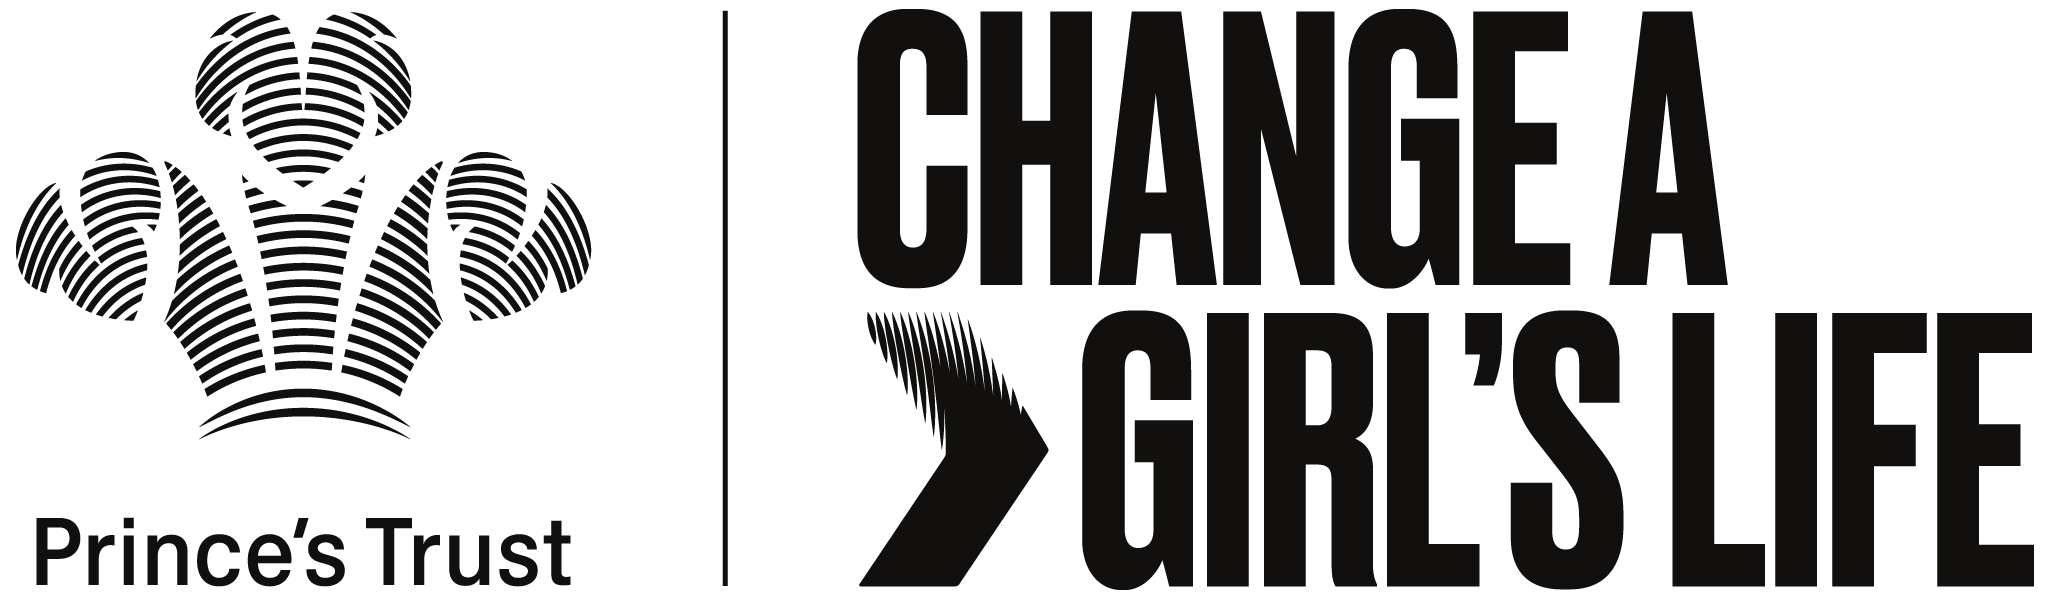 The Princes Trust - Change A Girl’s Life